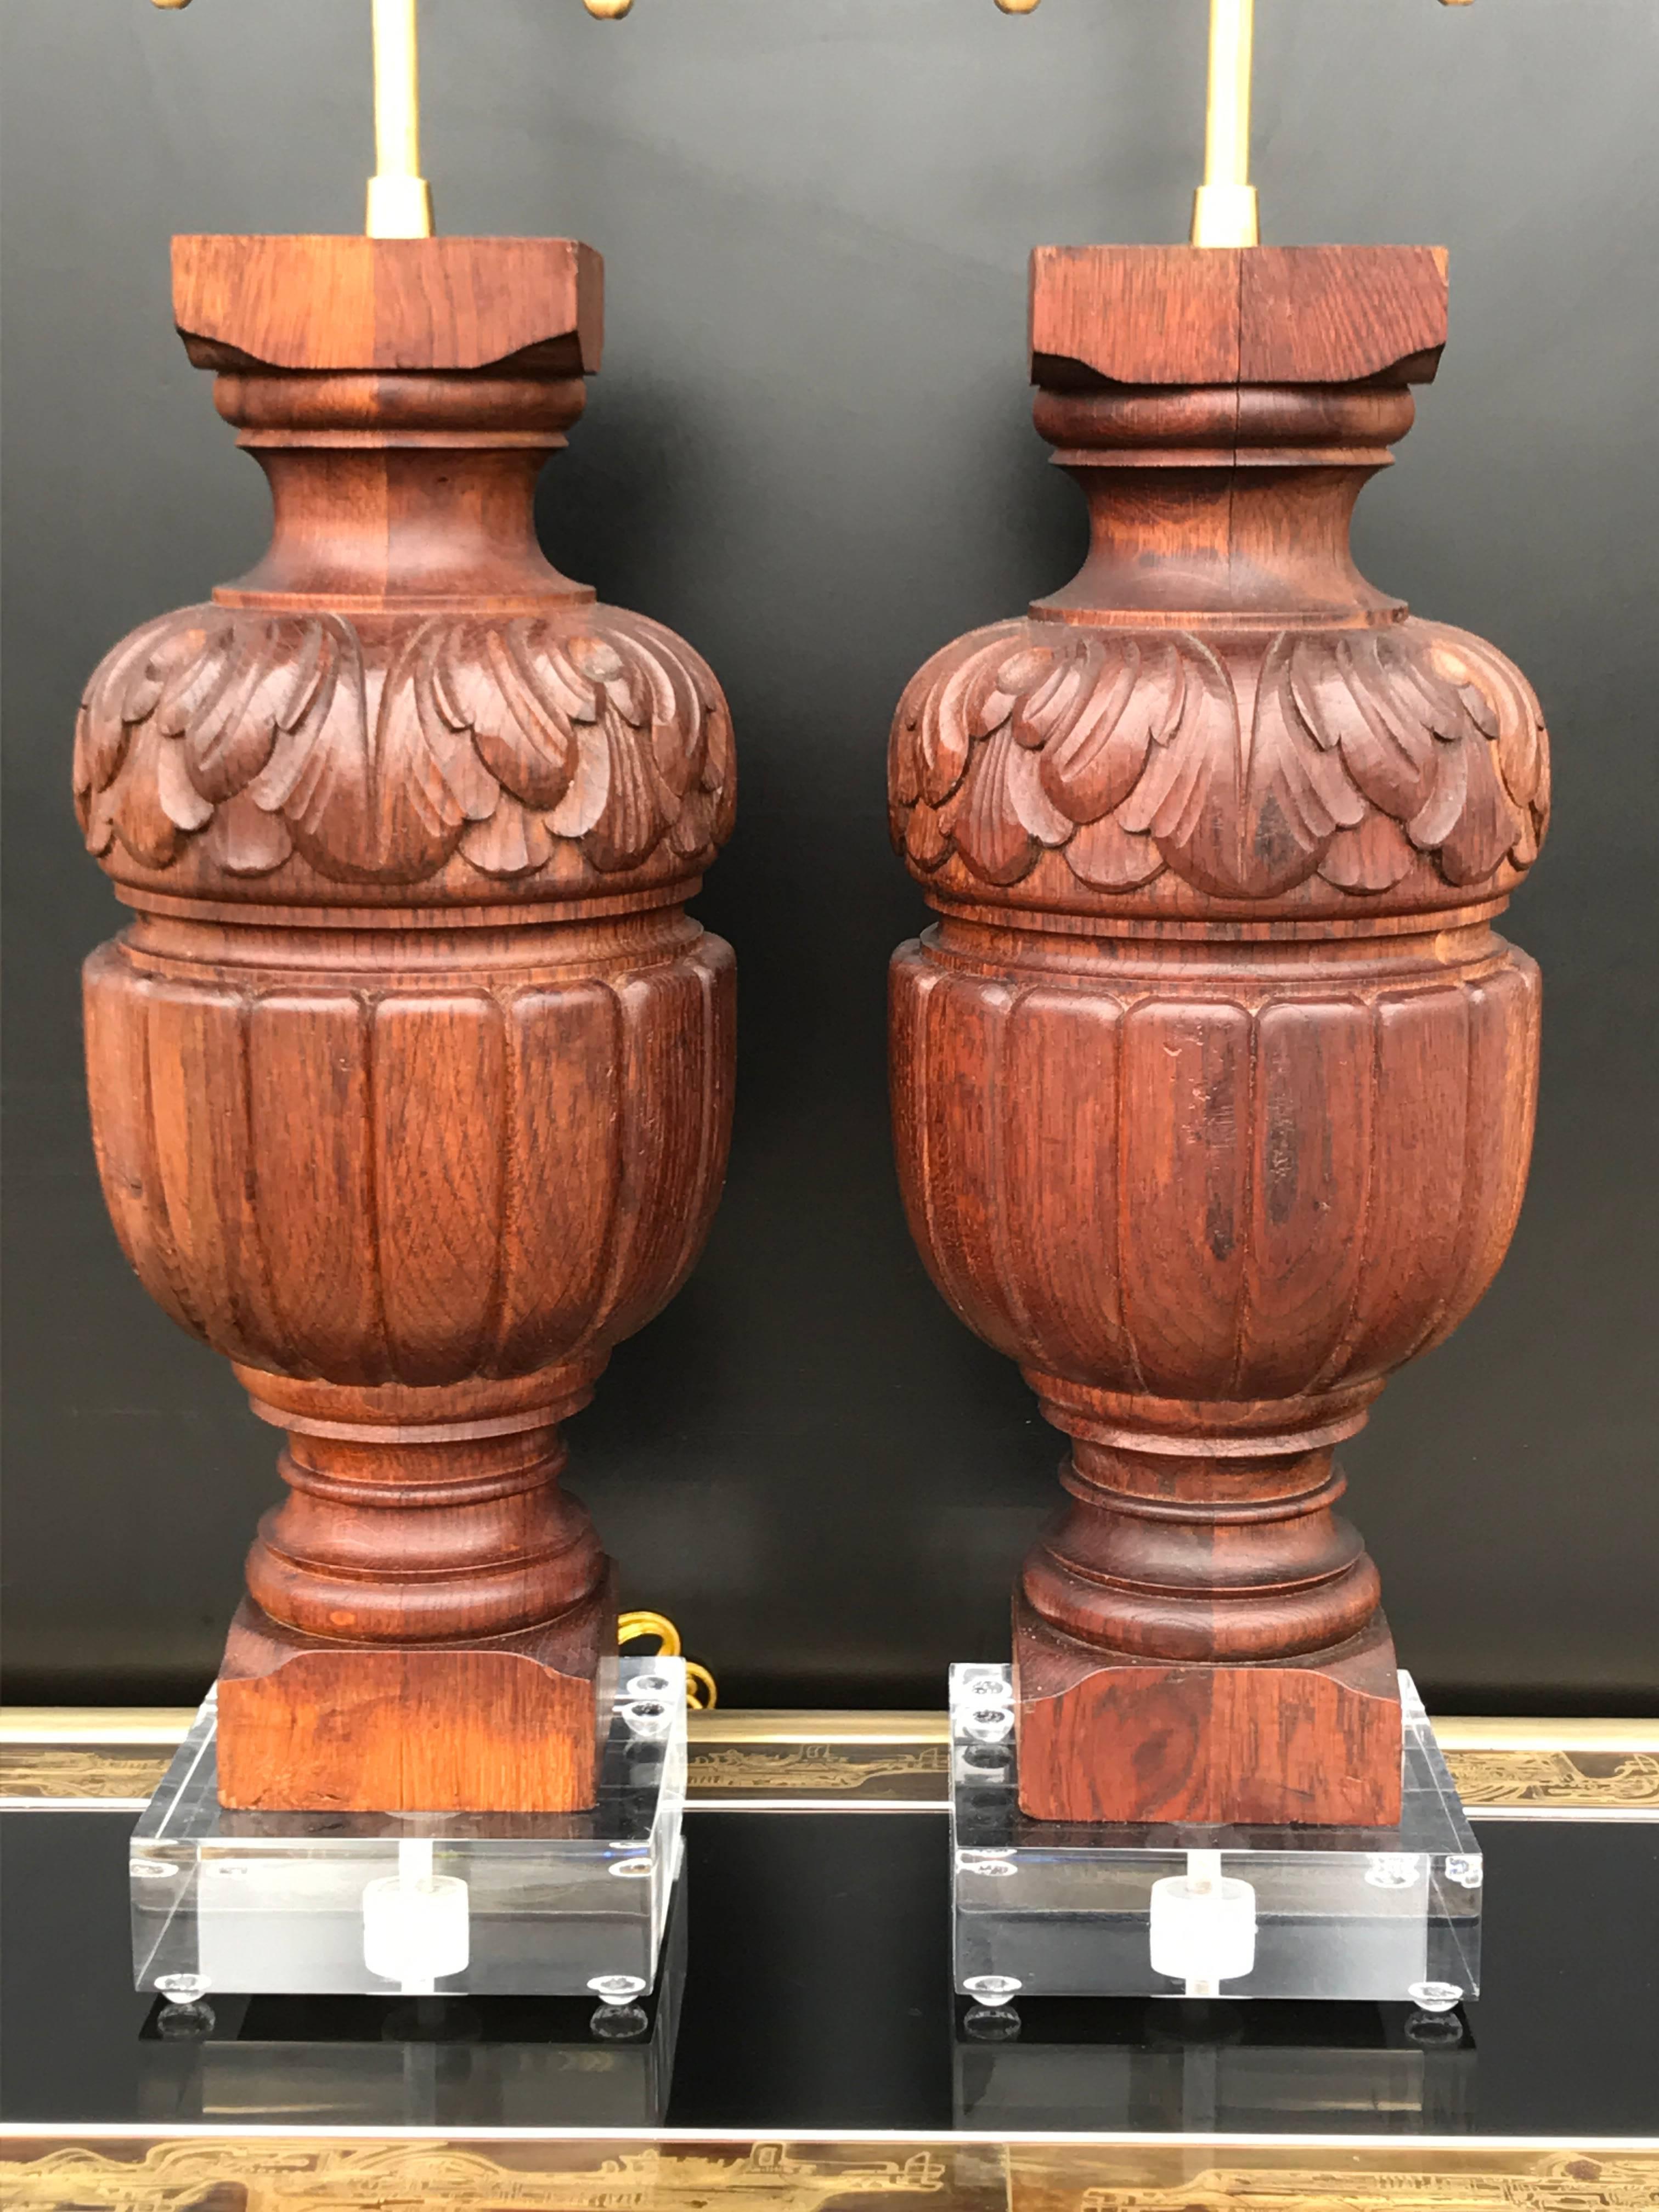 Pair of architectural baluster fragments mounted as lamps.